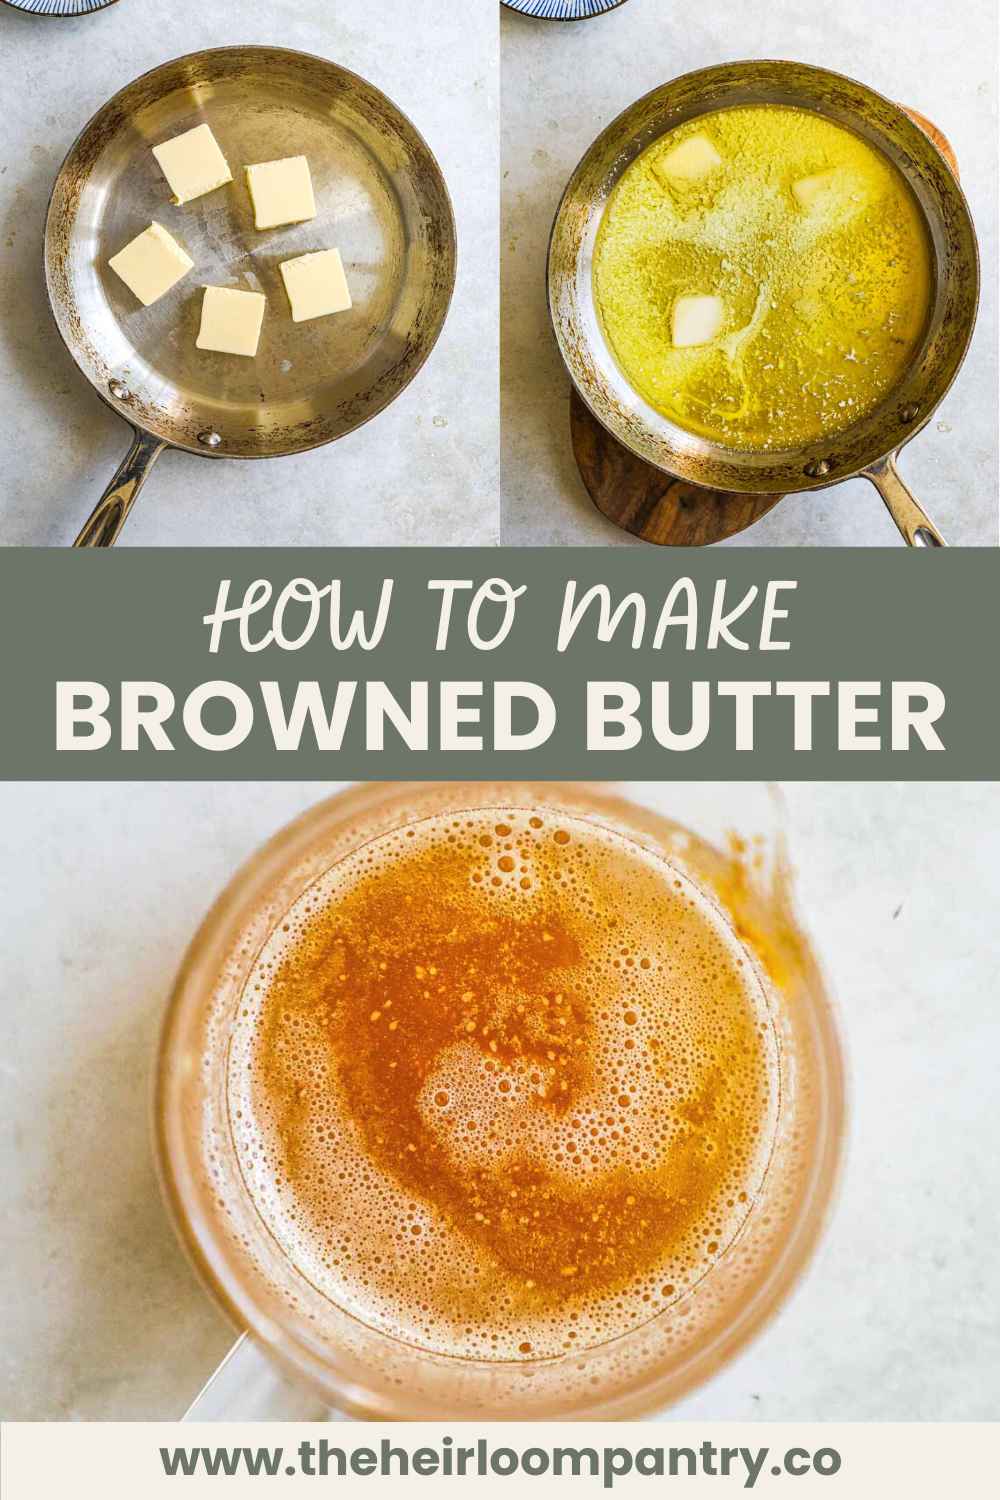 How to brown butter Pinterest pin.